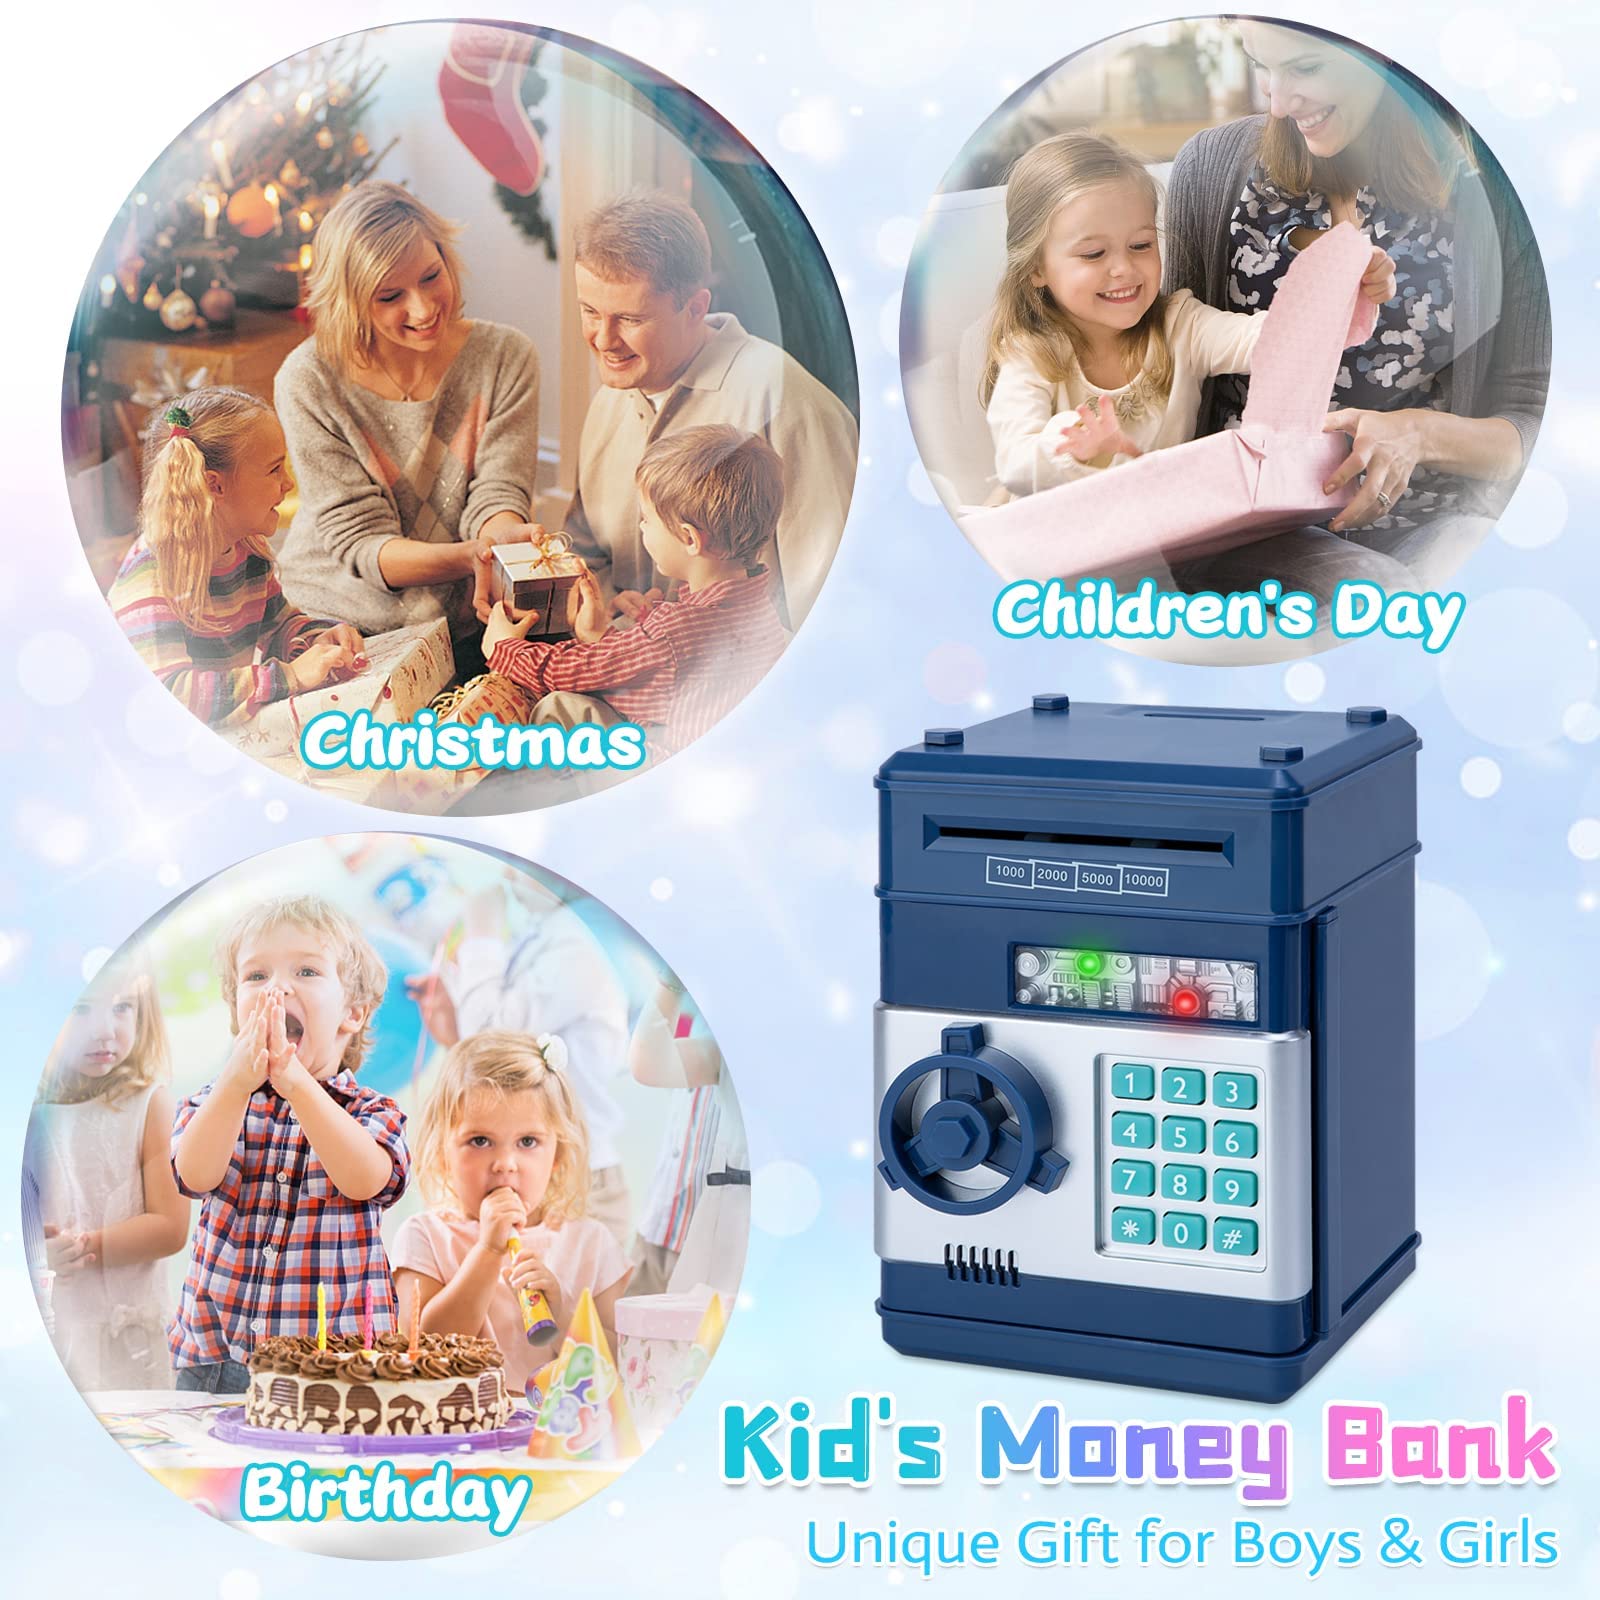 VIO Kids Toys for Boys Girls ,Electronic Banks for Kids Money Savings Box Toys Mini ATM Coin Bank for Children Best Birthday Christmas Gifts Cash Coin Can for Kid 8-12 Year Old (Black Silver)